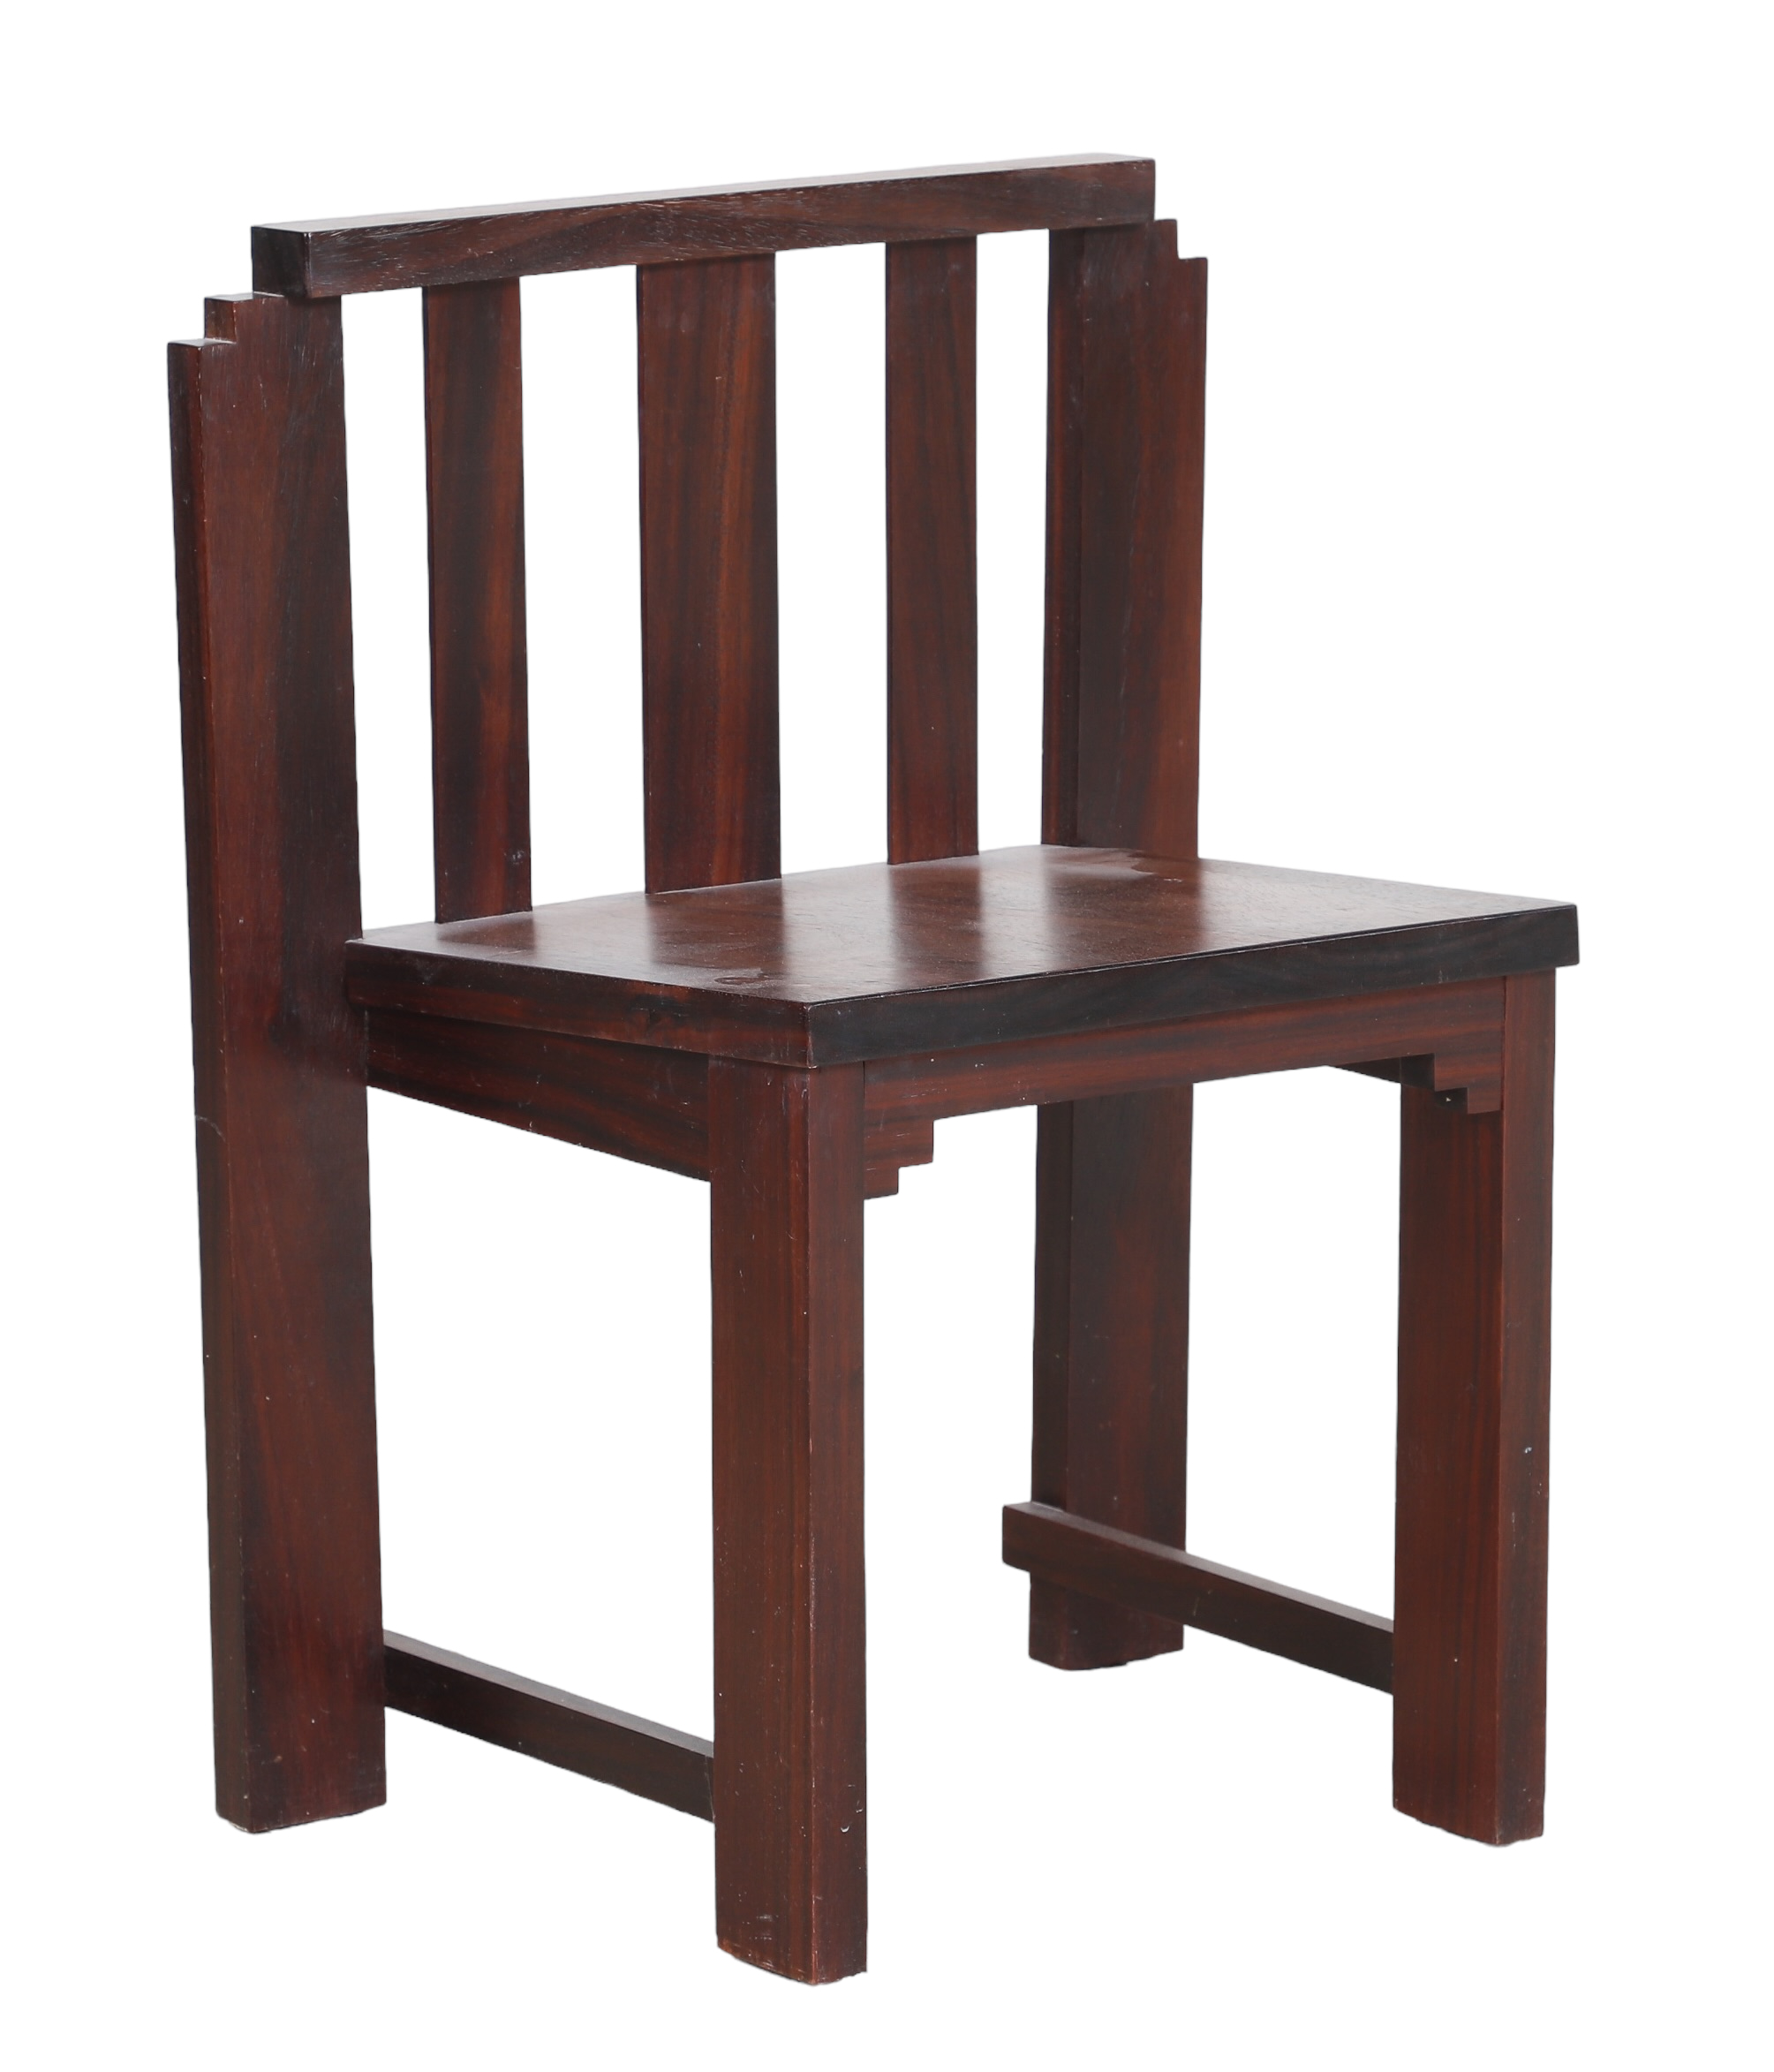 Chinese elmwood low chair slatted 3b168a